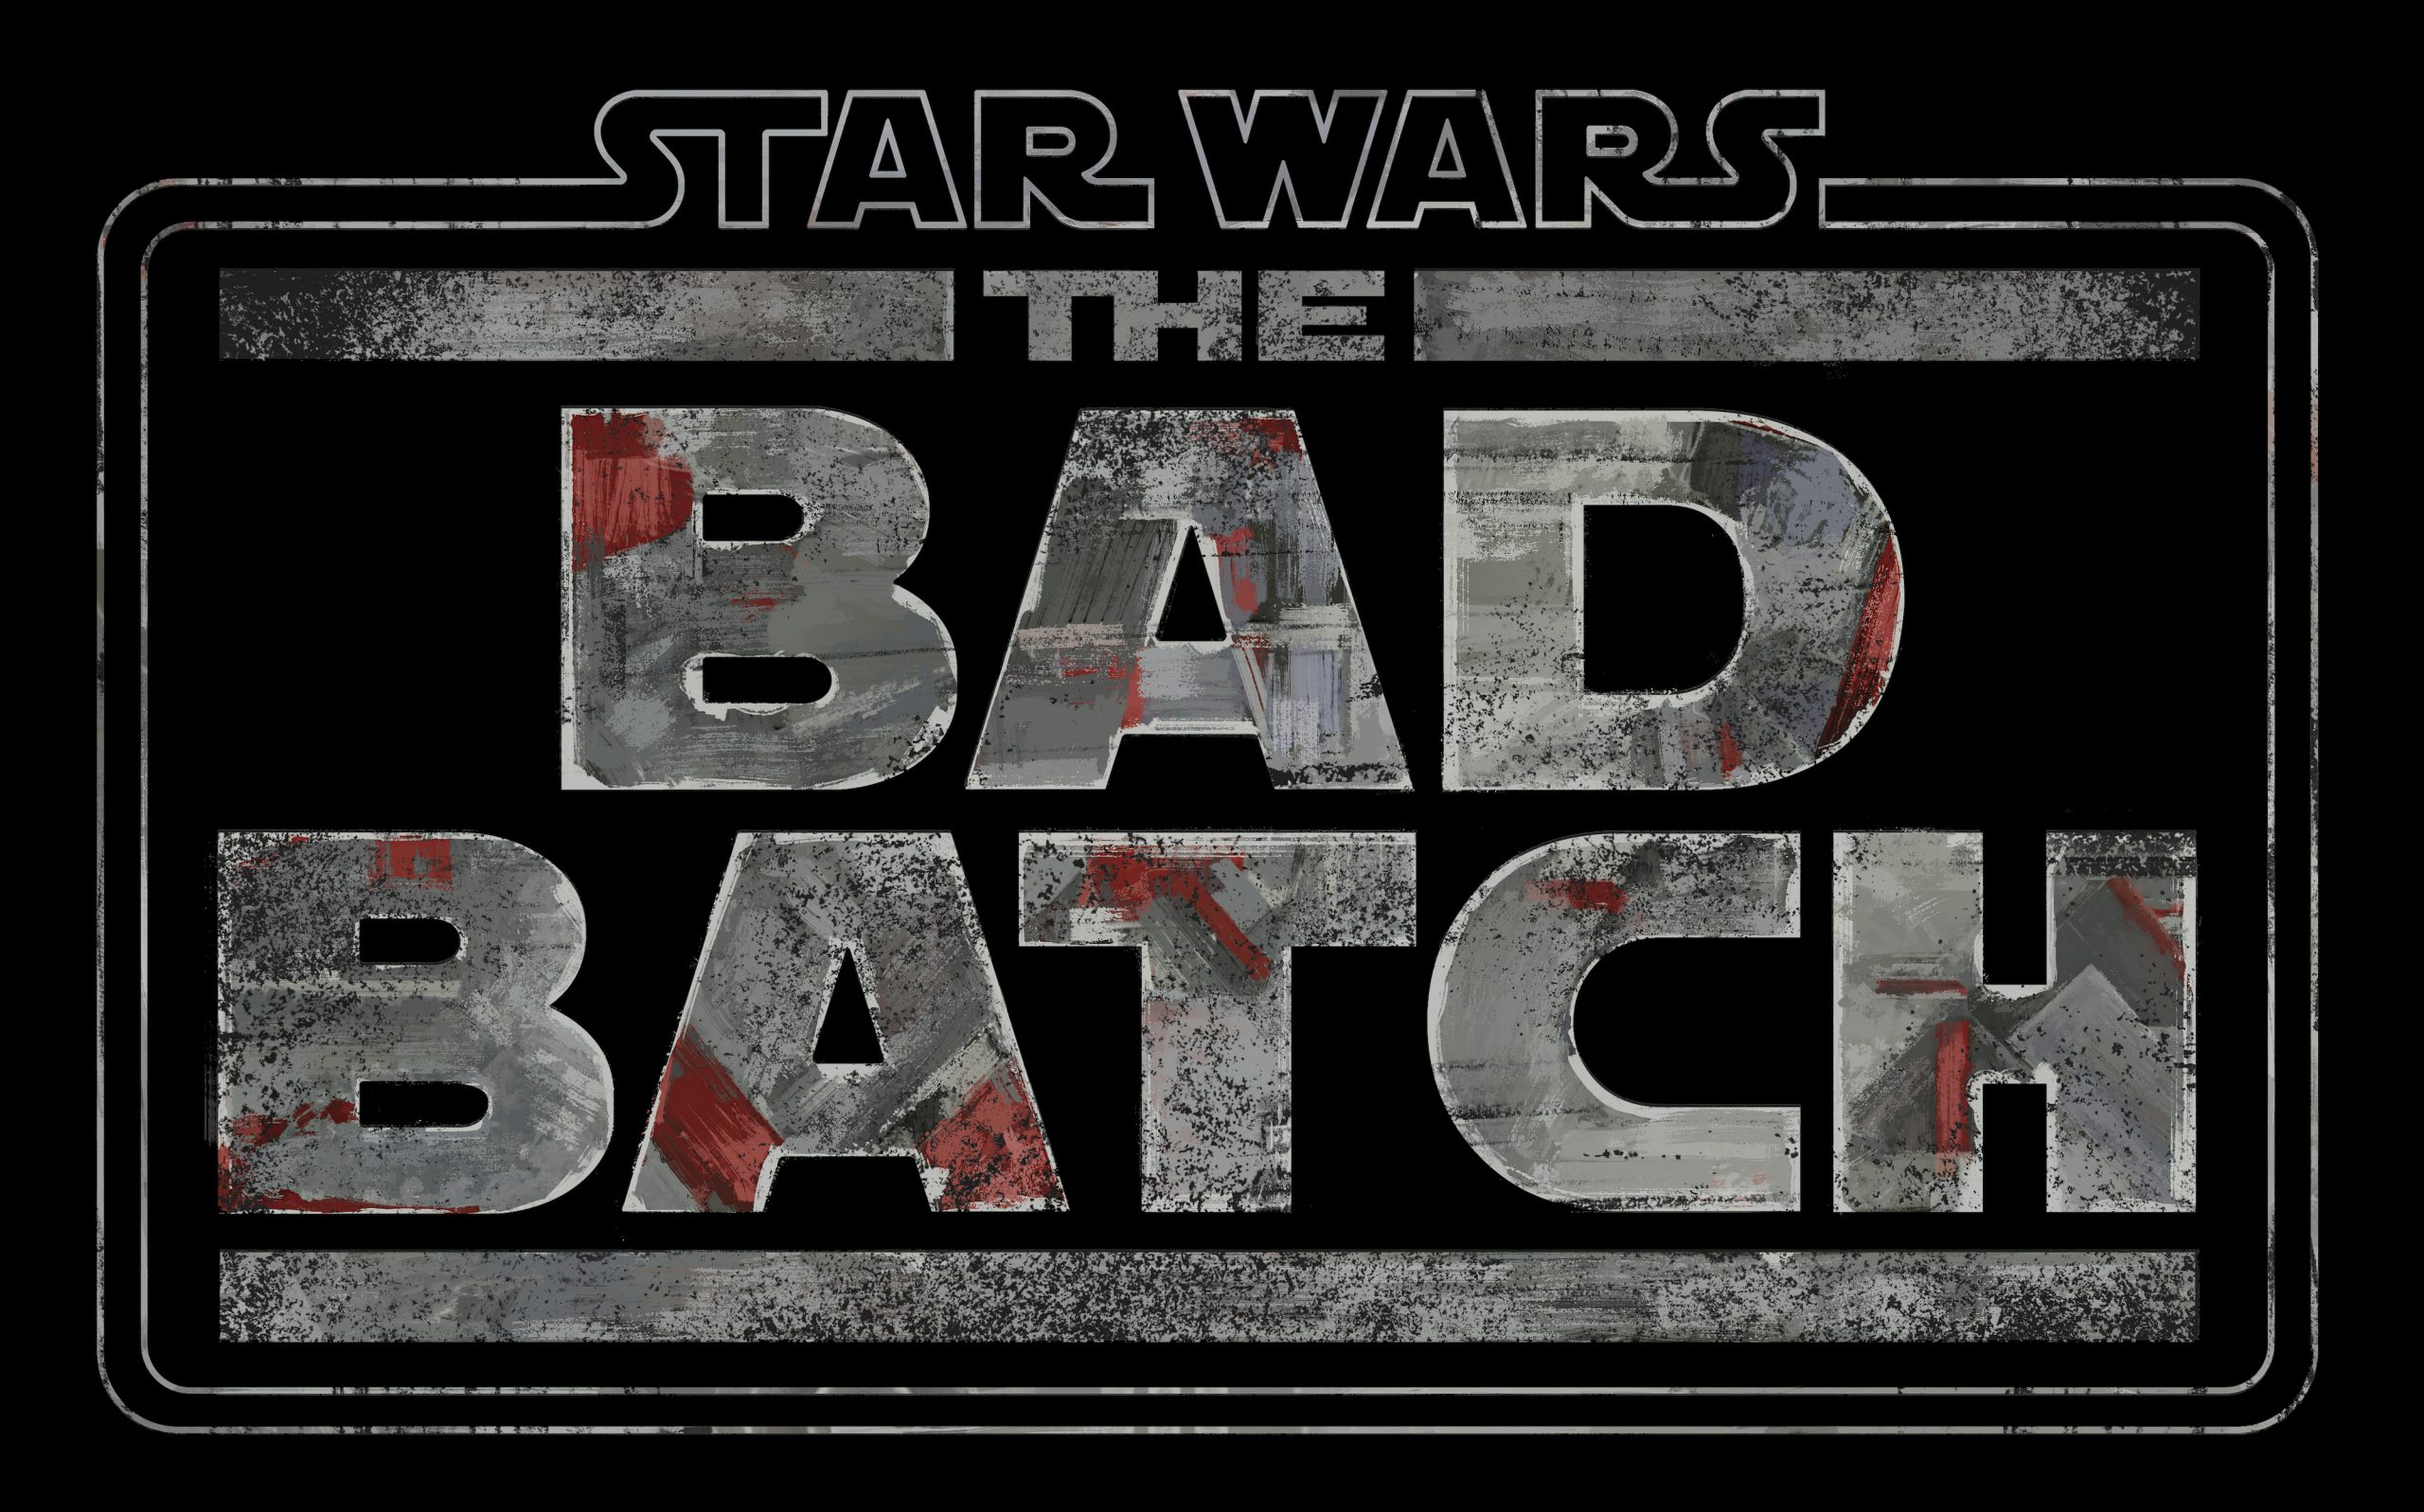 Disney Releases The Bad Batch